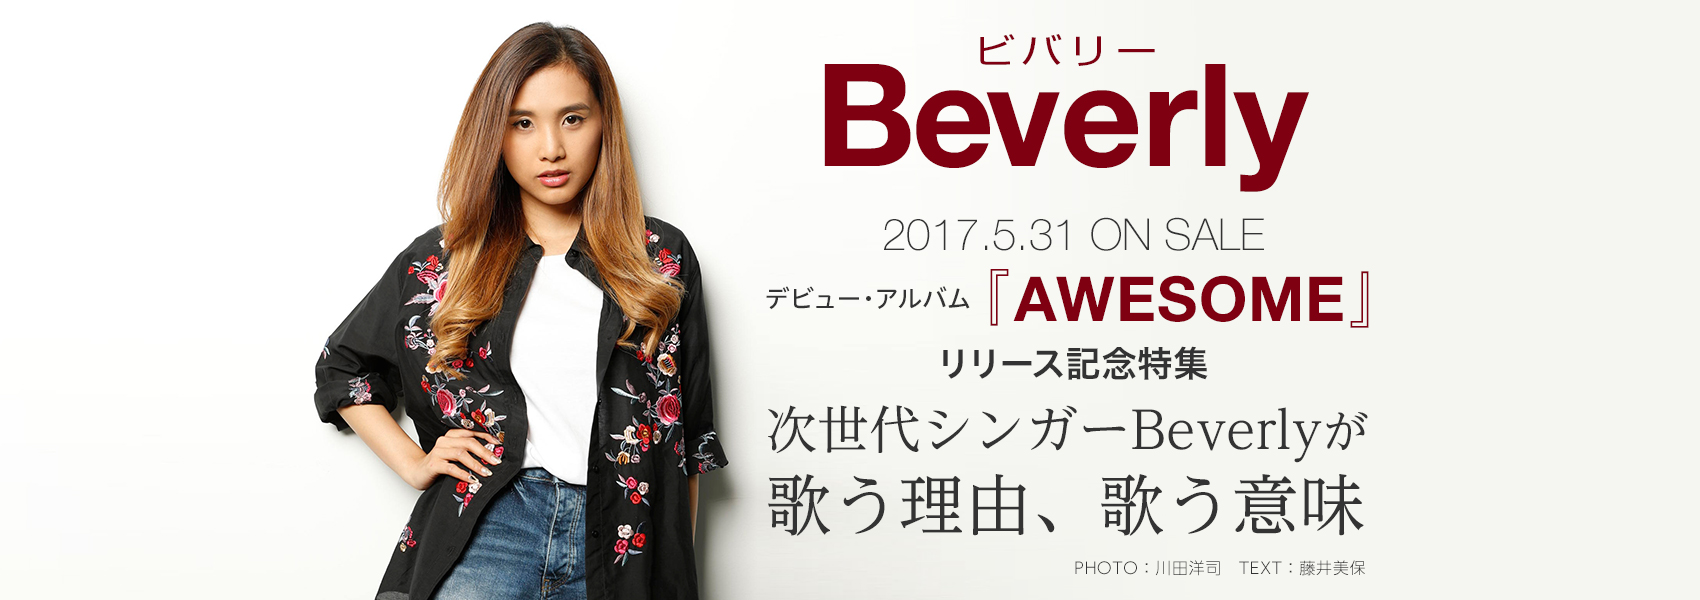 Beverly 2017.5.31 ON SALE fr[EAowAWESOMEx[XLOW